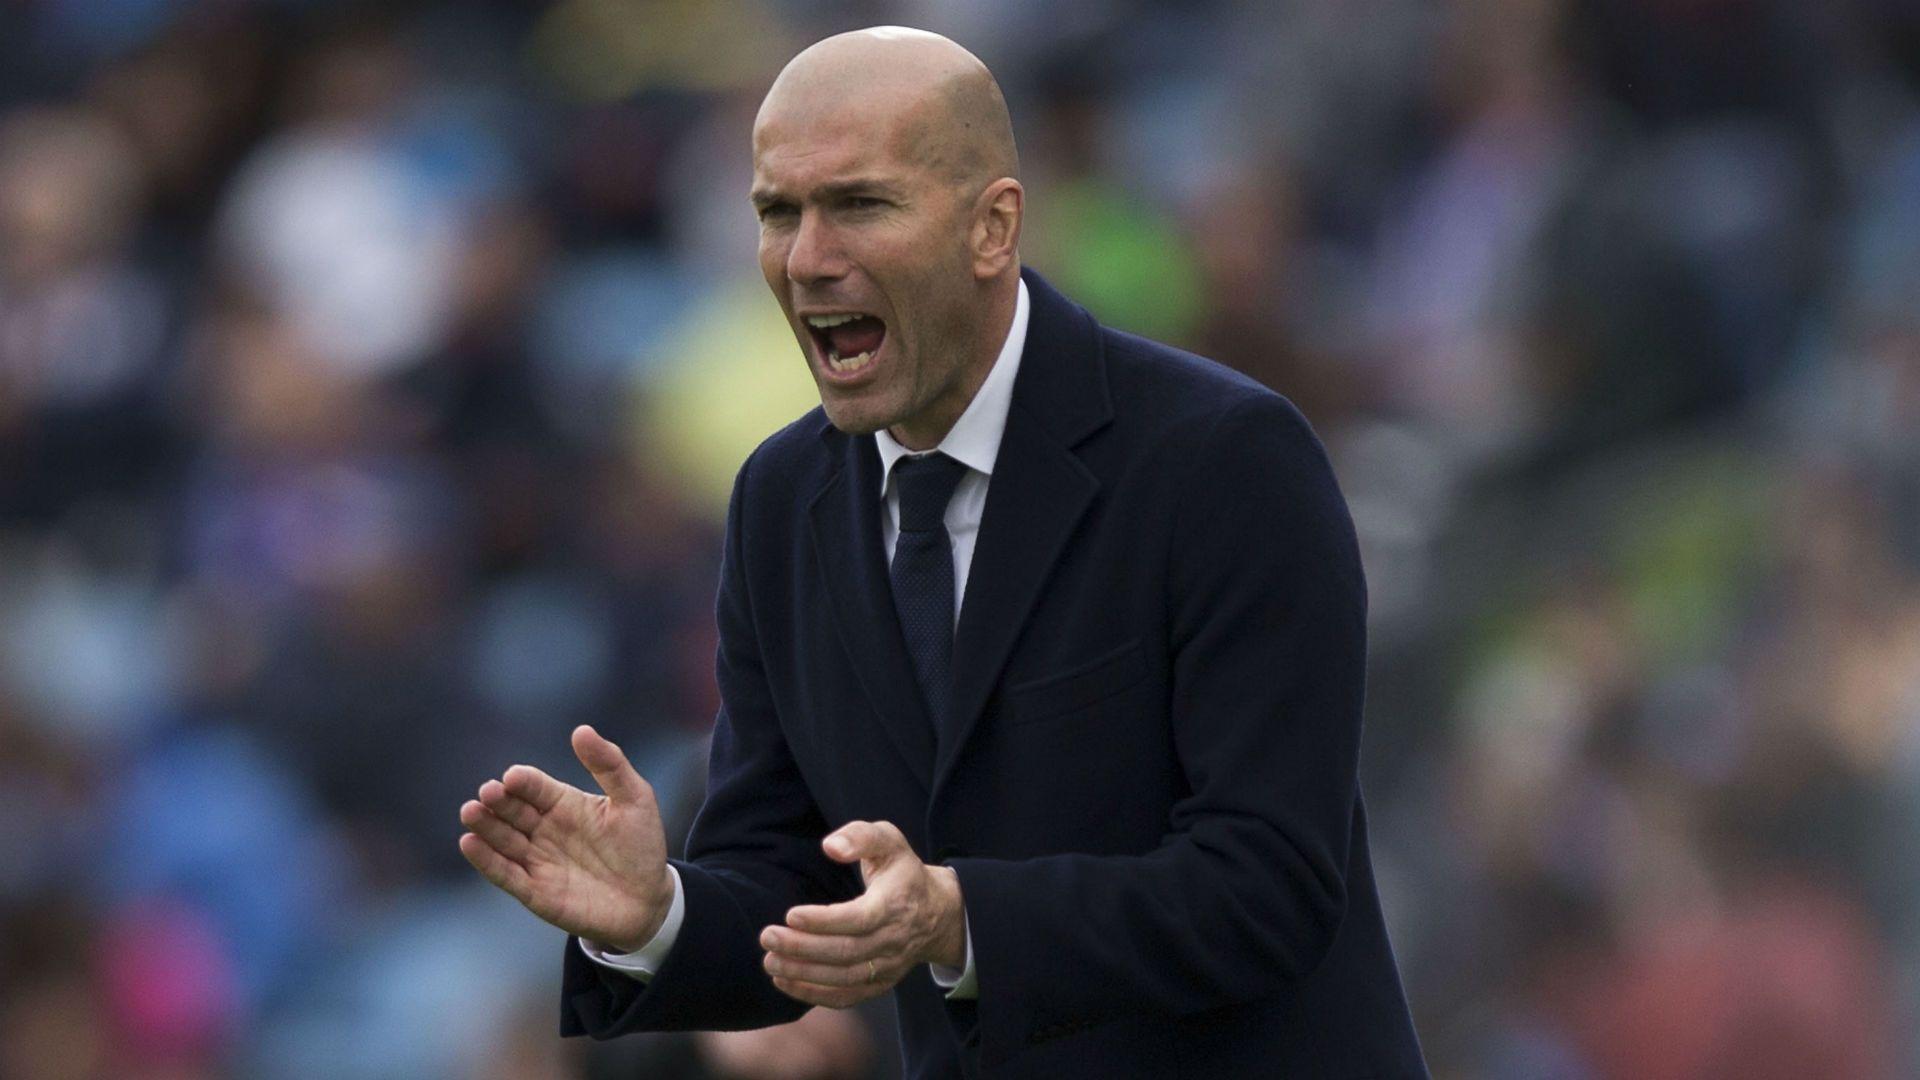 Zidane Wants Madrid To Be Ready For Barca Slip Up